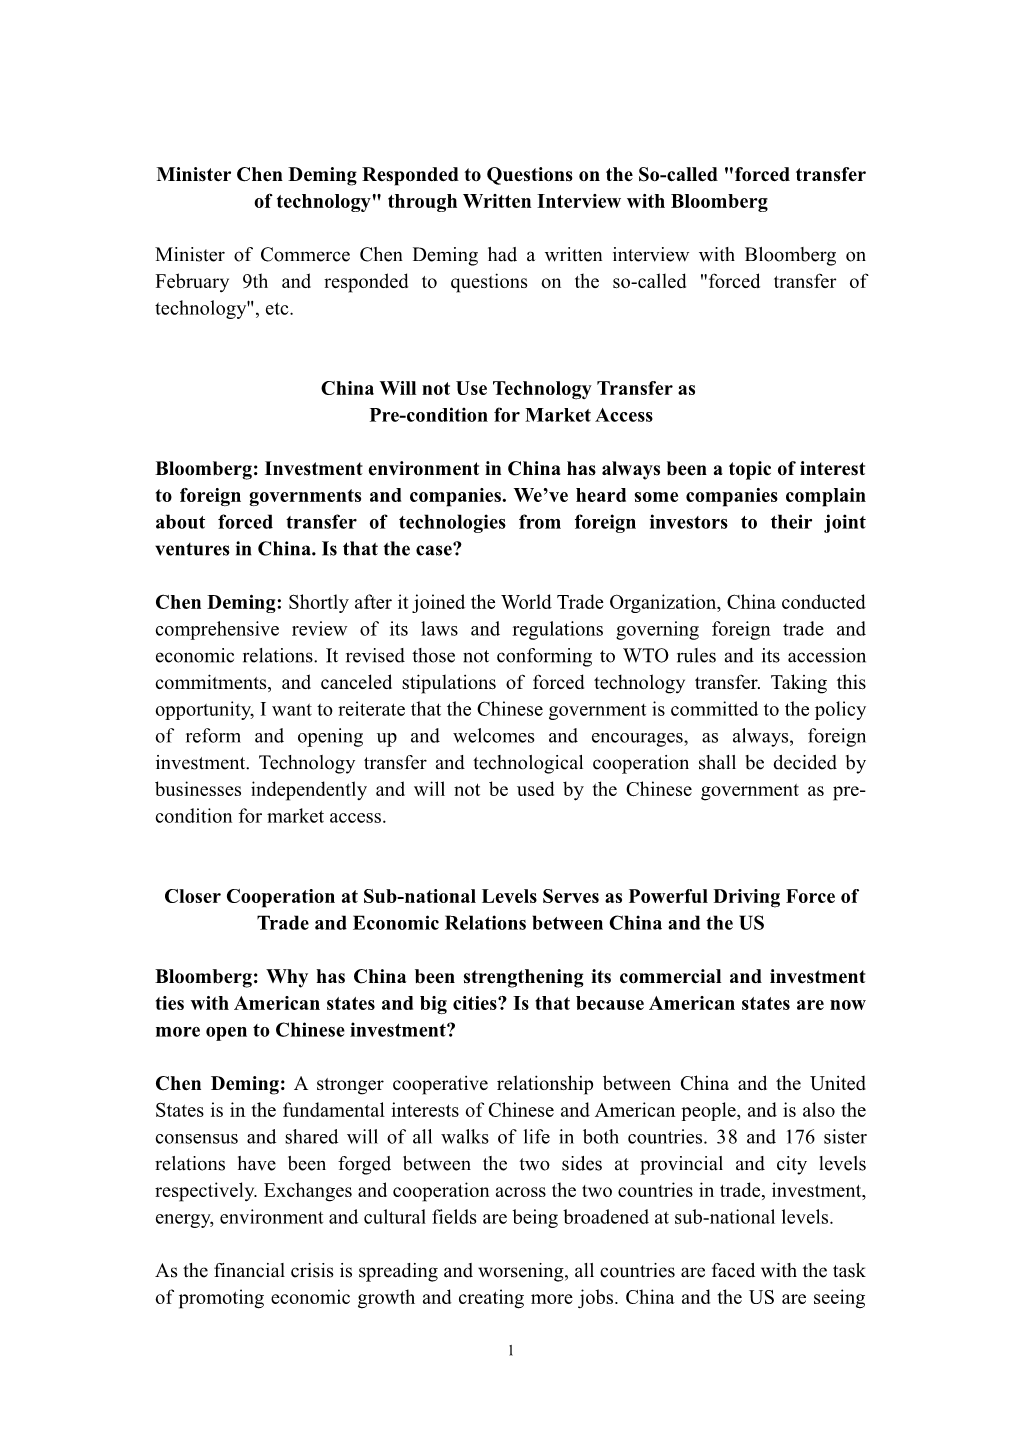 Minister Chen Deming Responded to the So-Called Forced Transfer of Technology Through Written